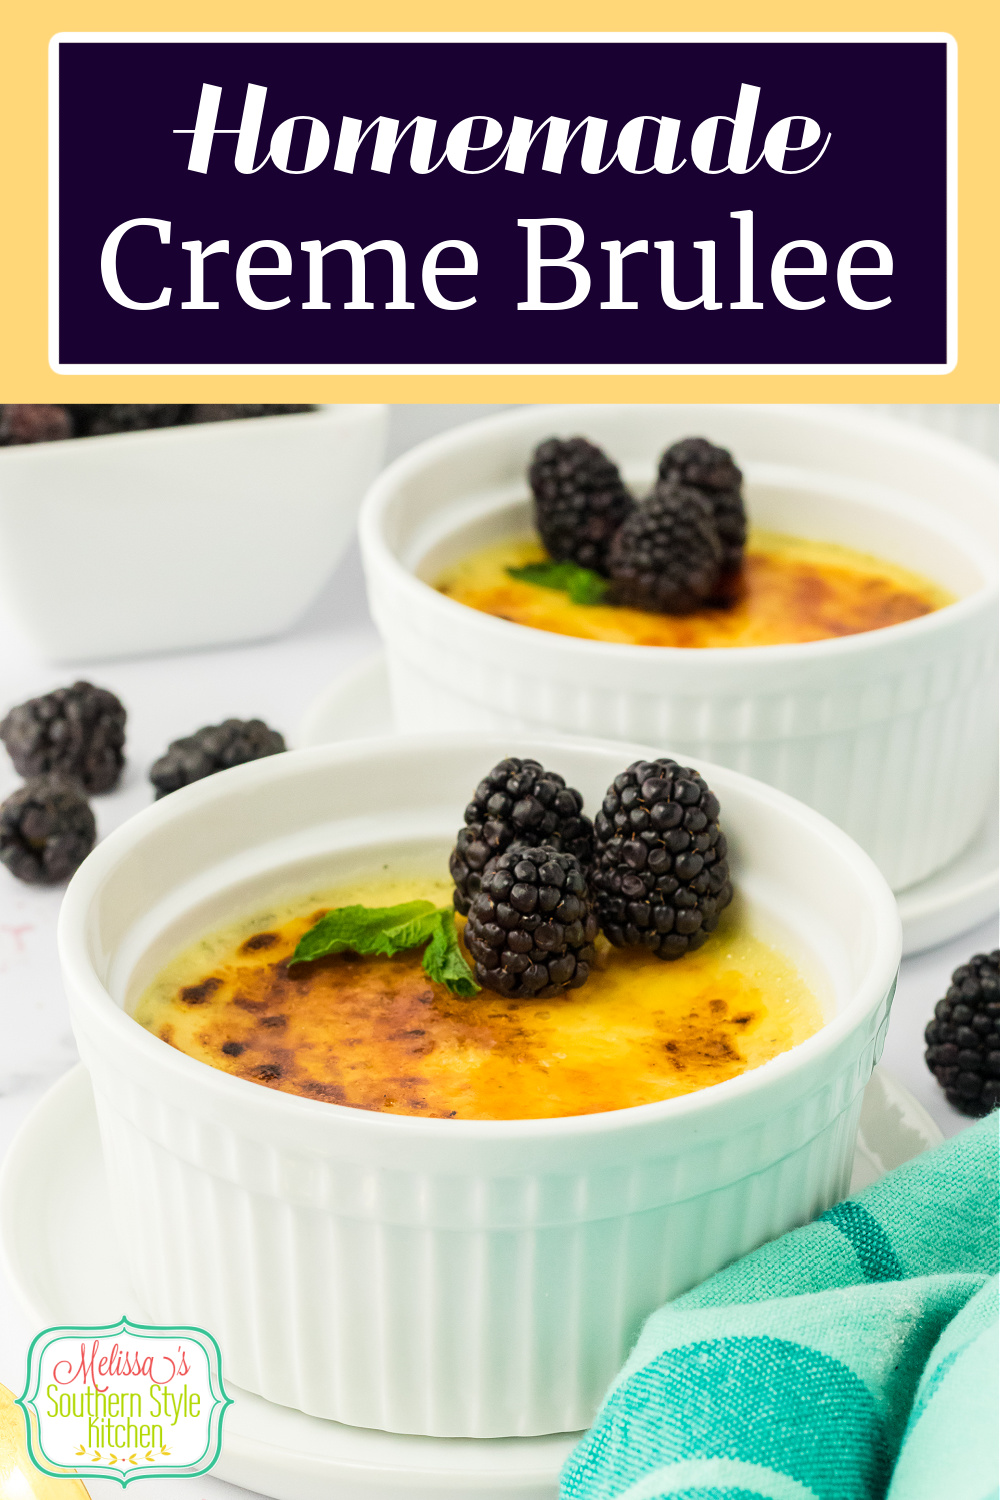 This Creme Brulee recipe features a creamy vanilla bean custard crowned with a caramelized sugar topping that makes it simply irresistible. #cremebrulee #bakedcustard #bakedcremebrulee via @melissasssk